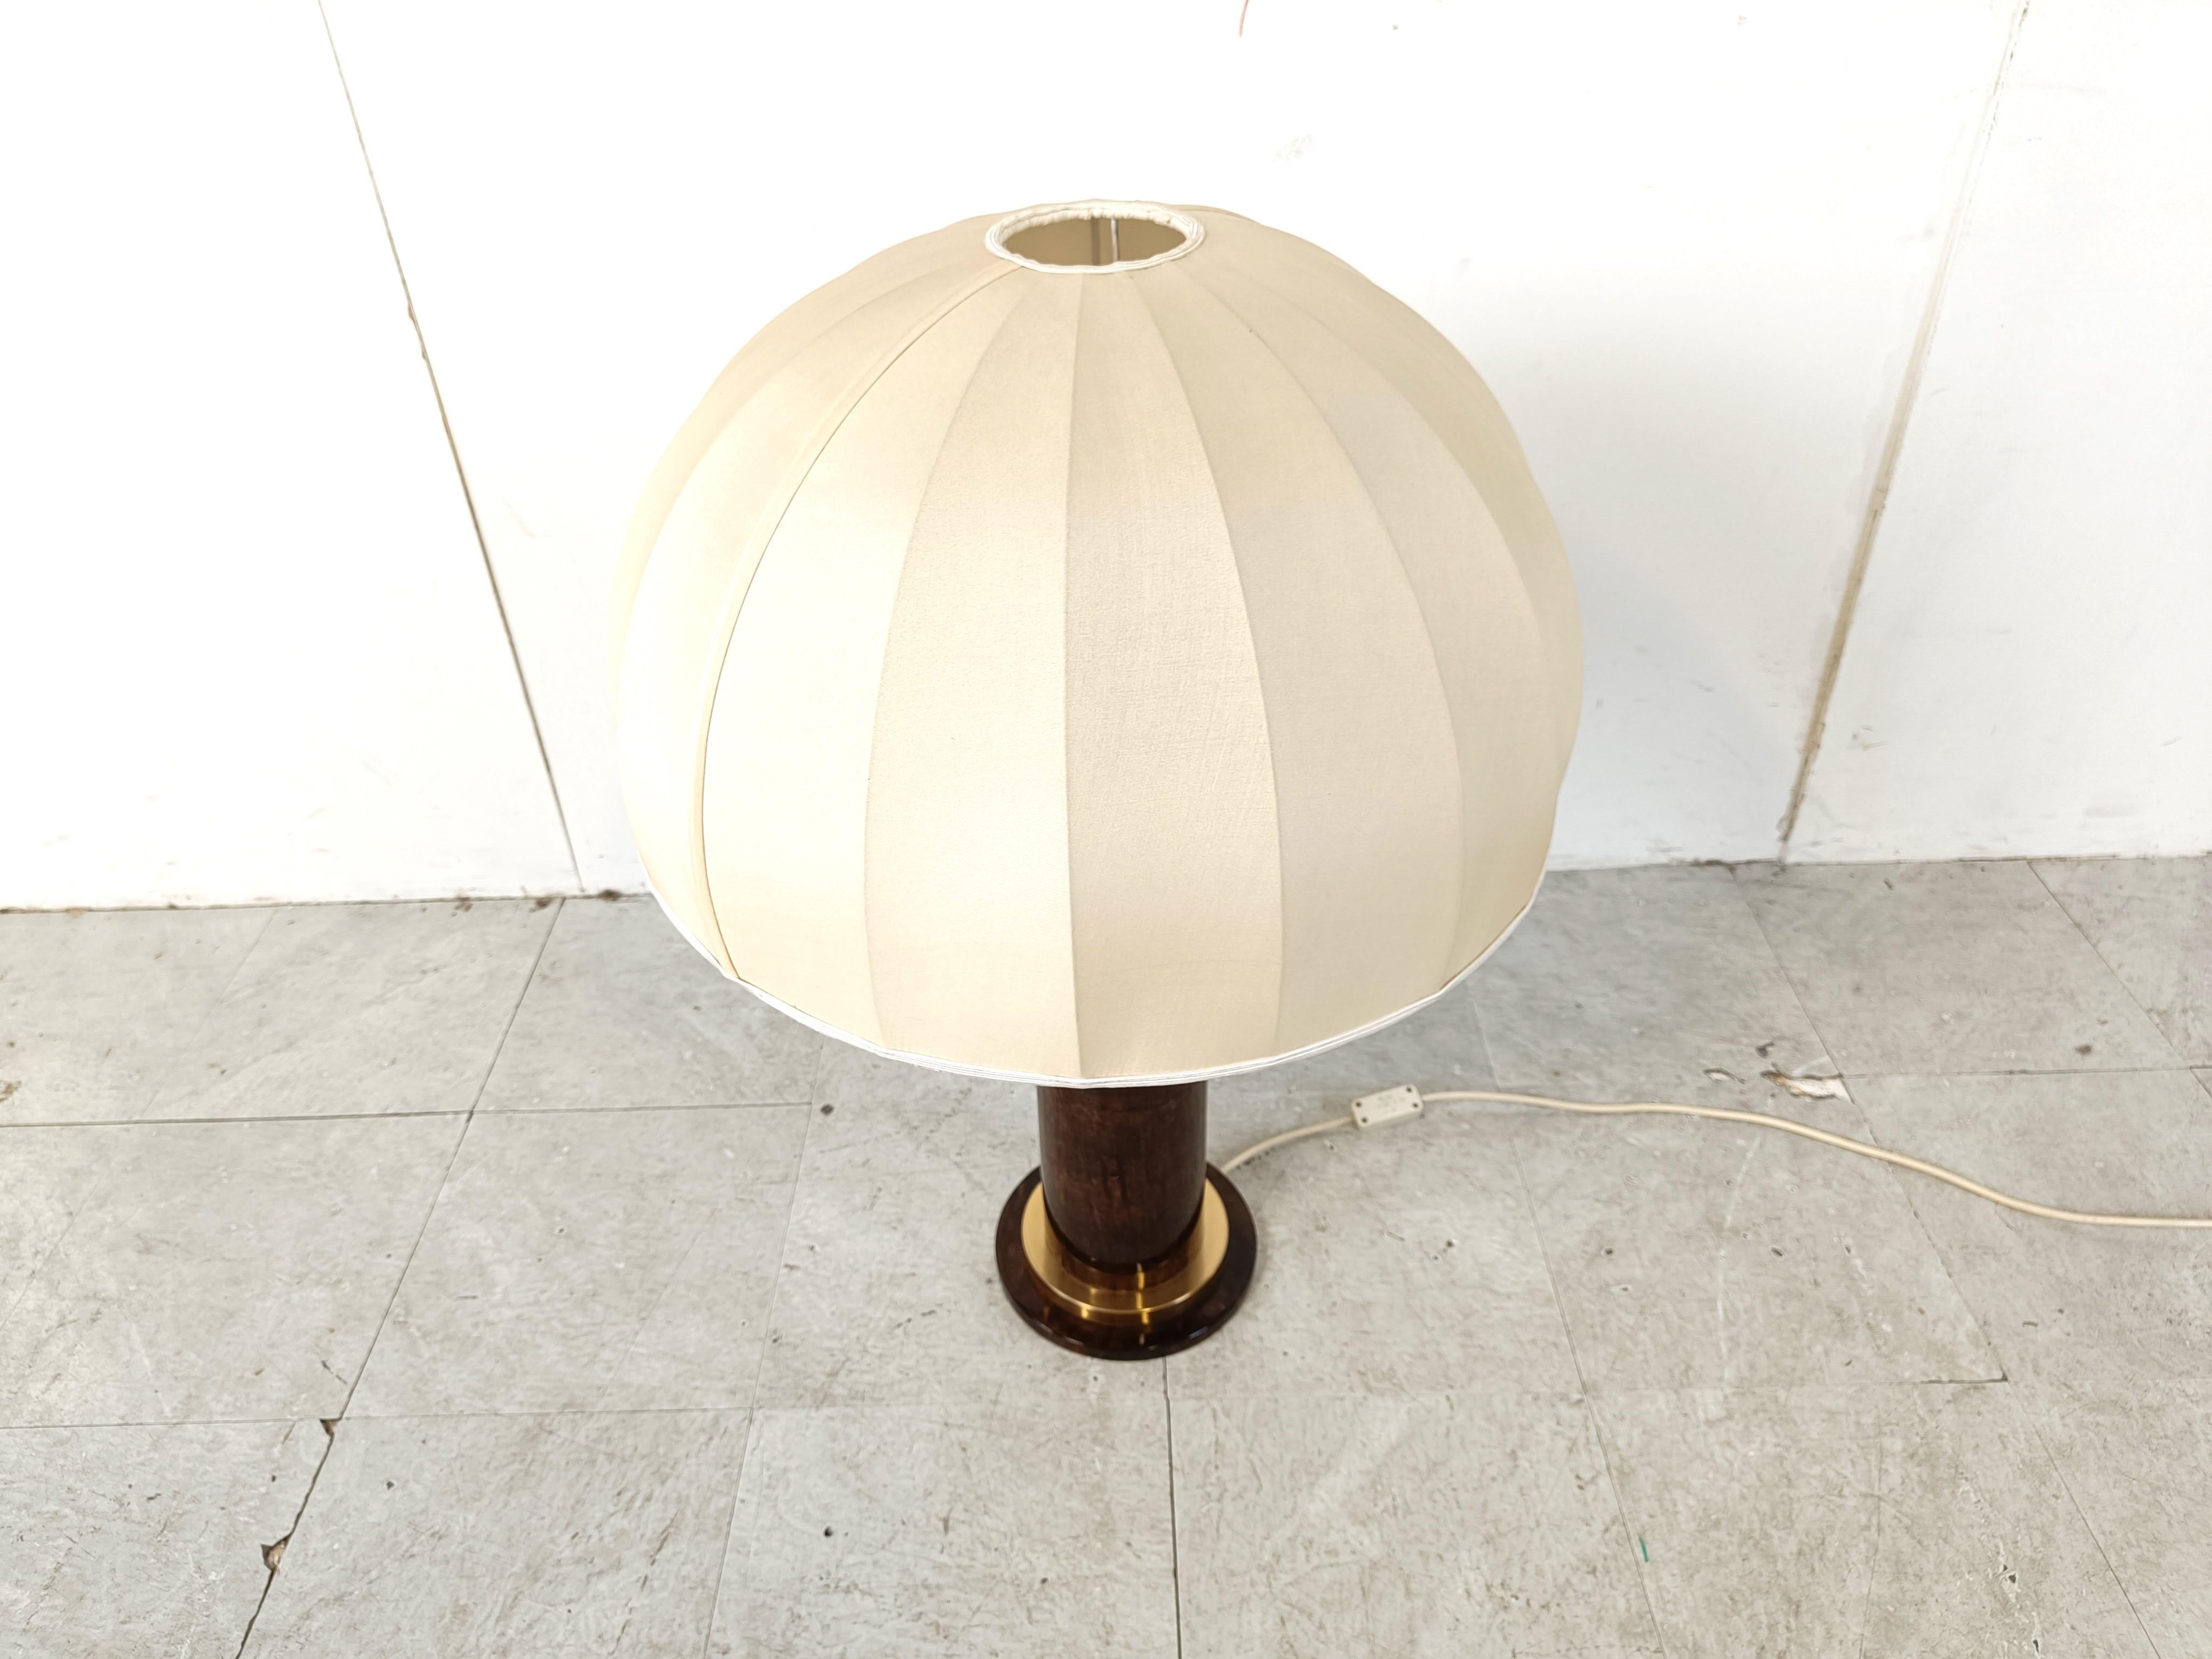 Rare mid century modern table lamp by Aldo Tura with its original lamp shade.

Made from brass and brown lacquered goatskin.

Labelled under the base.

Very good condition

1960s - Italy

Dimensions:
Height: 80cm
Diameter: 55cm

Ref.: 099930
